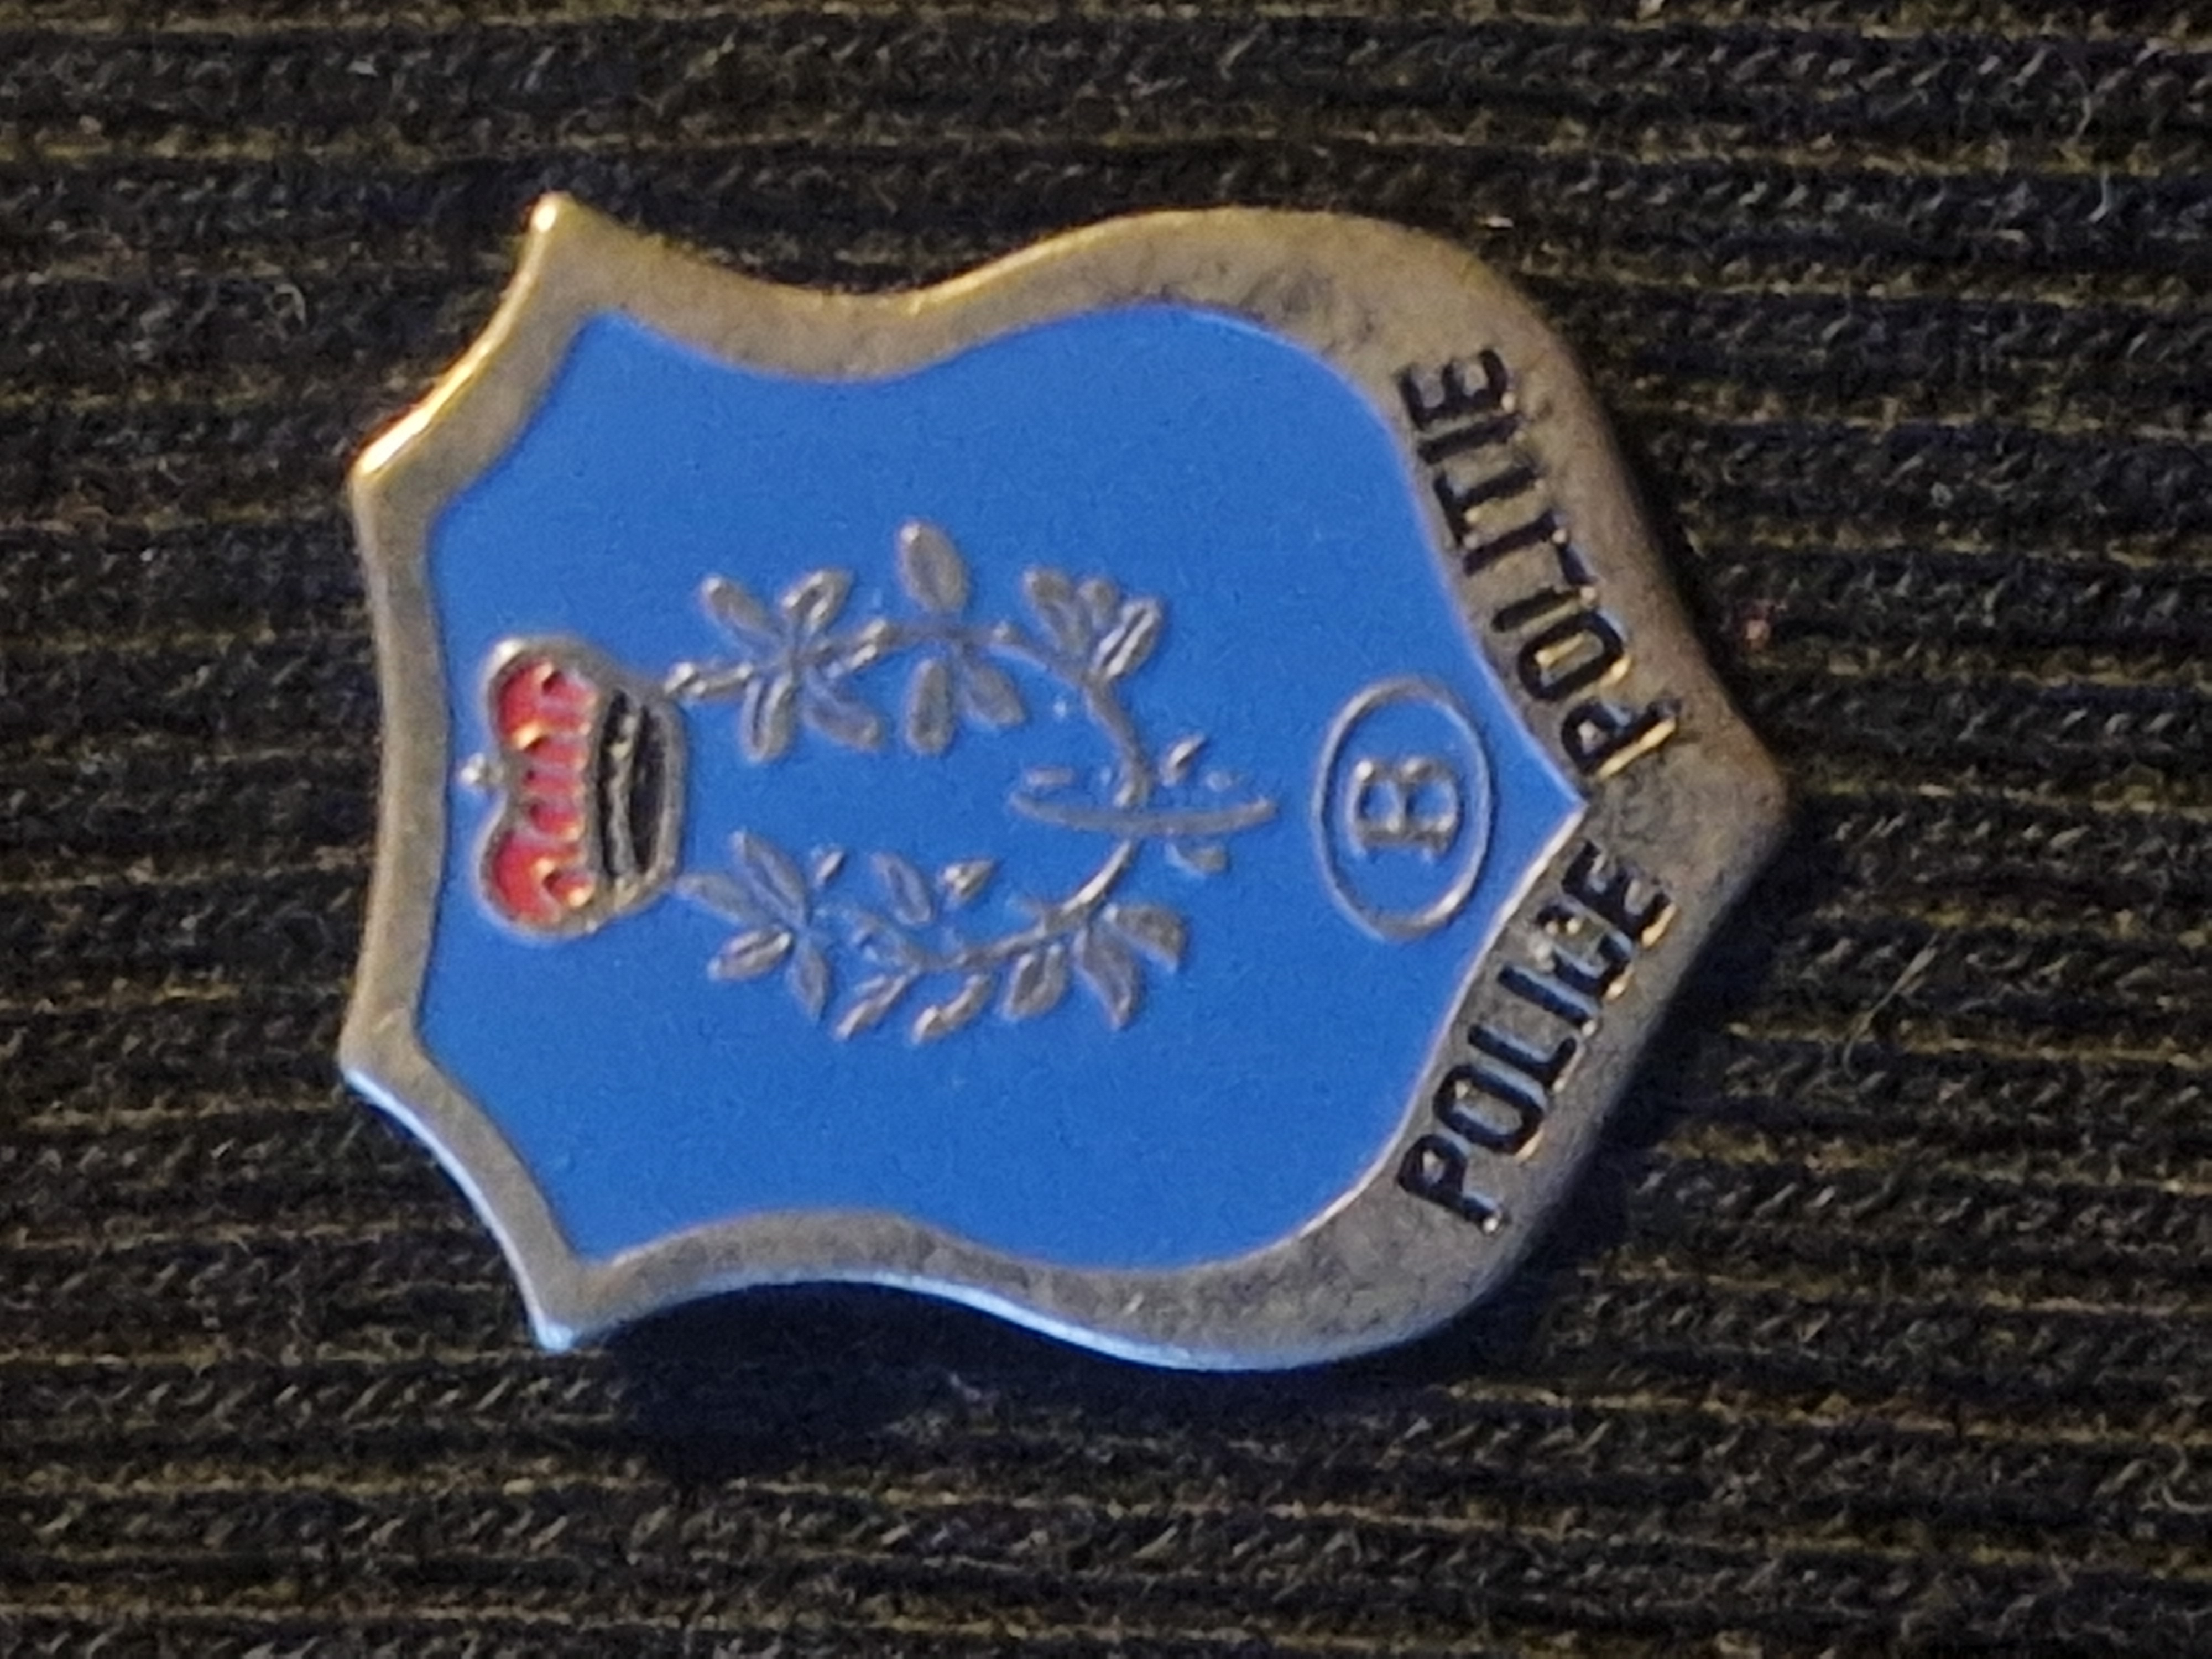 Police Patch Hunter - NMBS politie